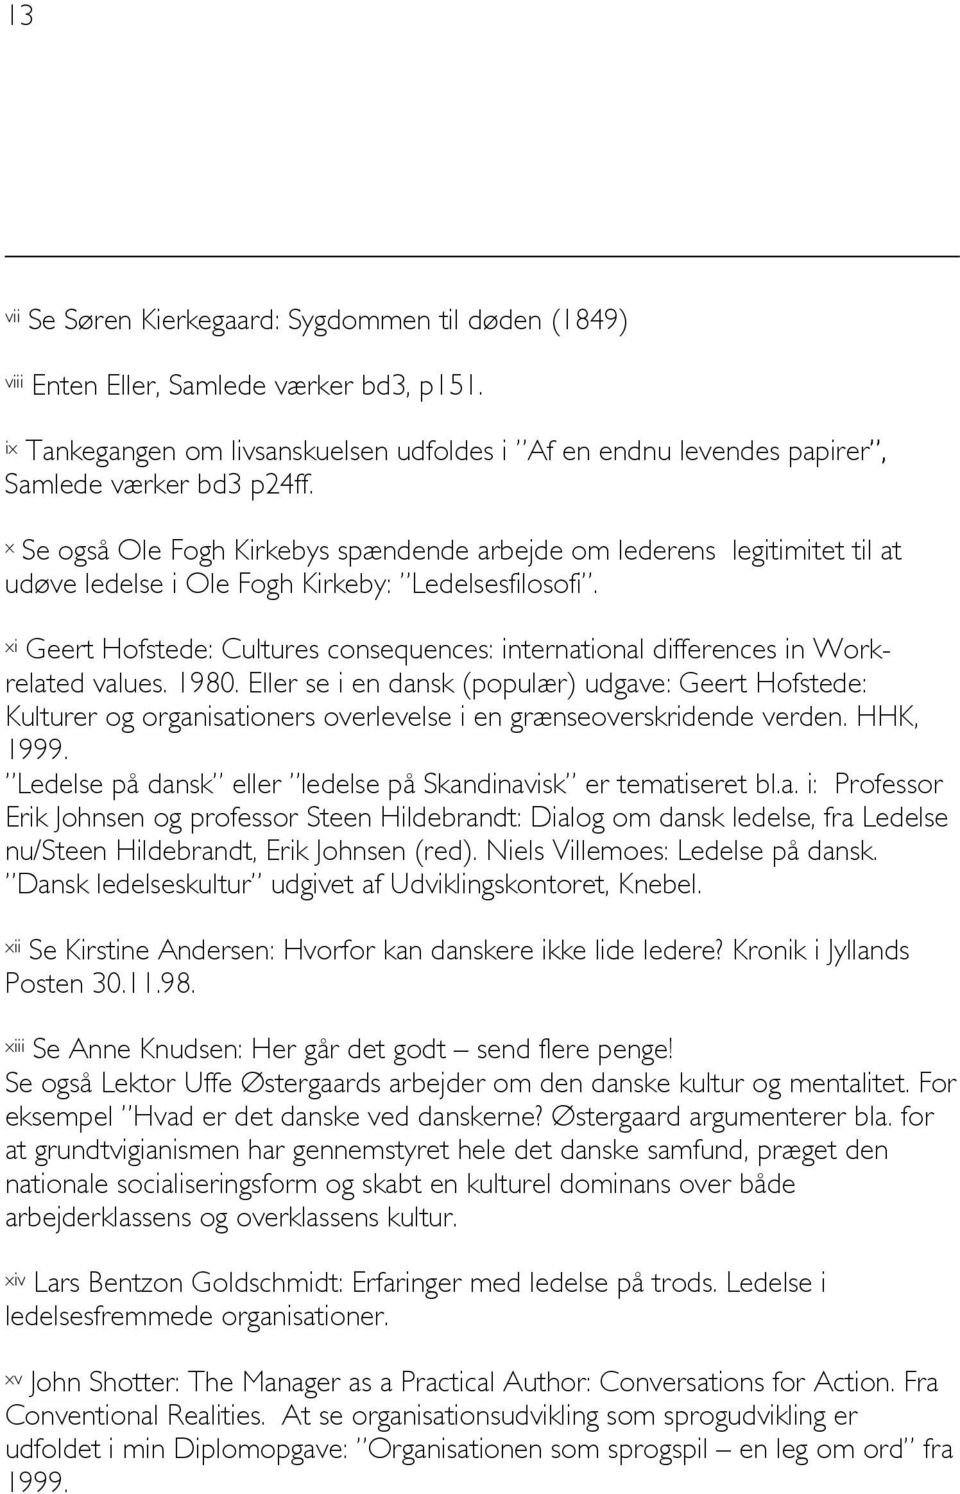 xi Geert Hofstede: Cultures consequences: international differences in Workrelated values. 1980.